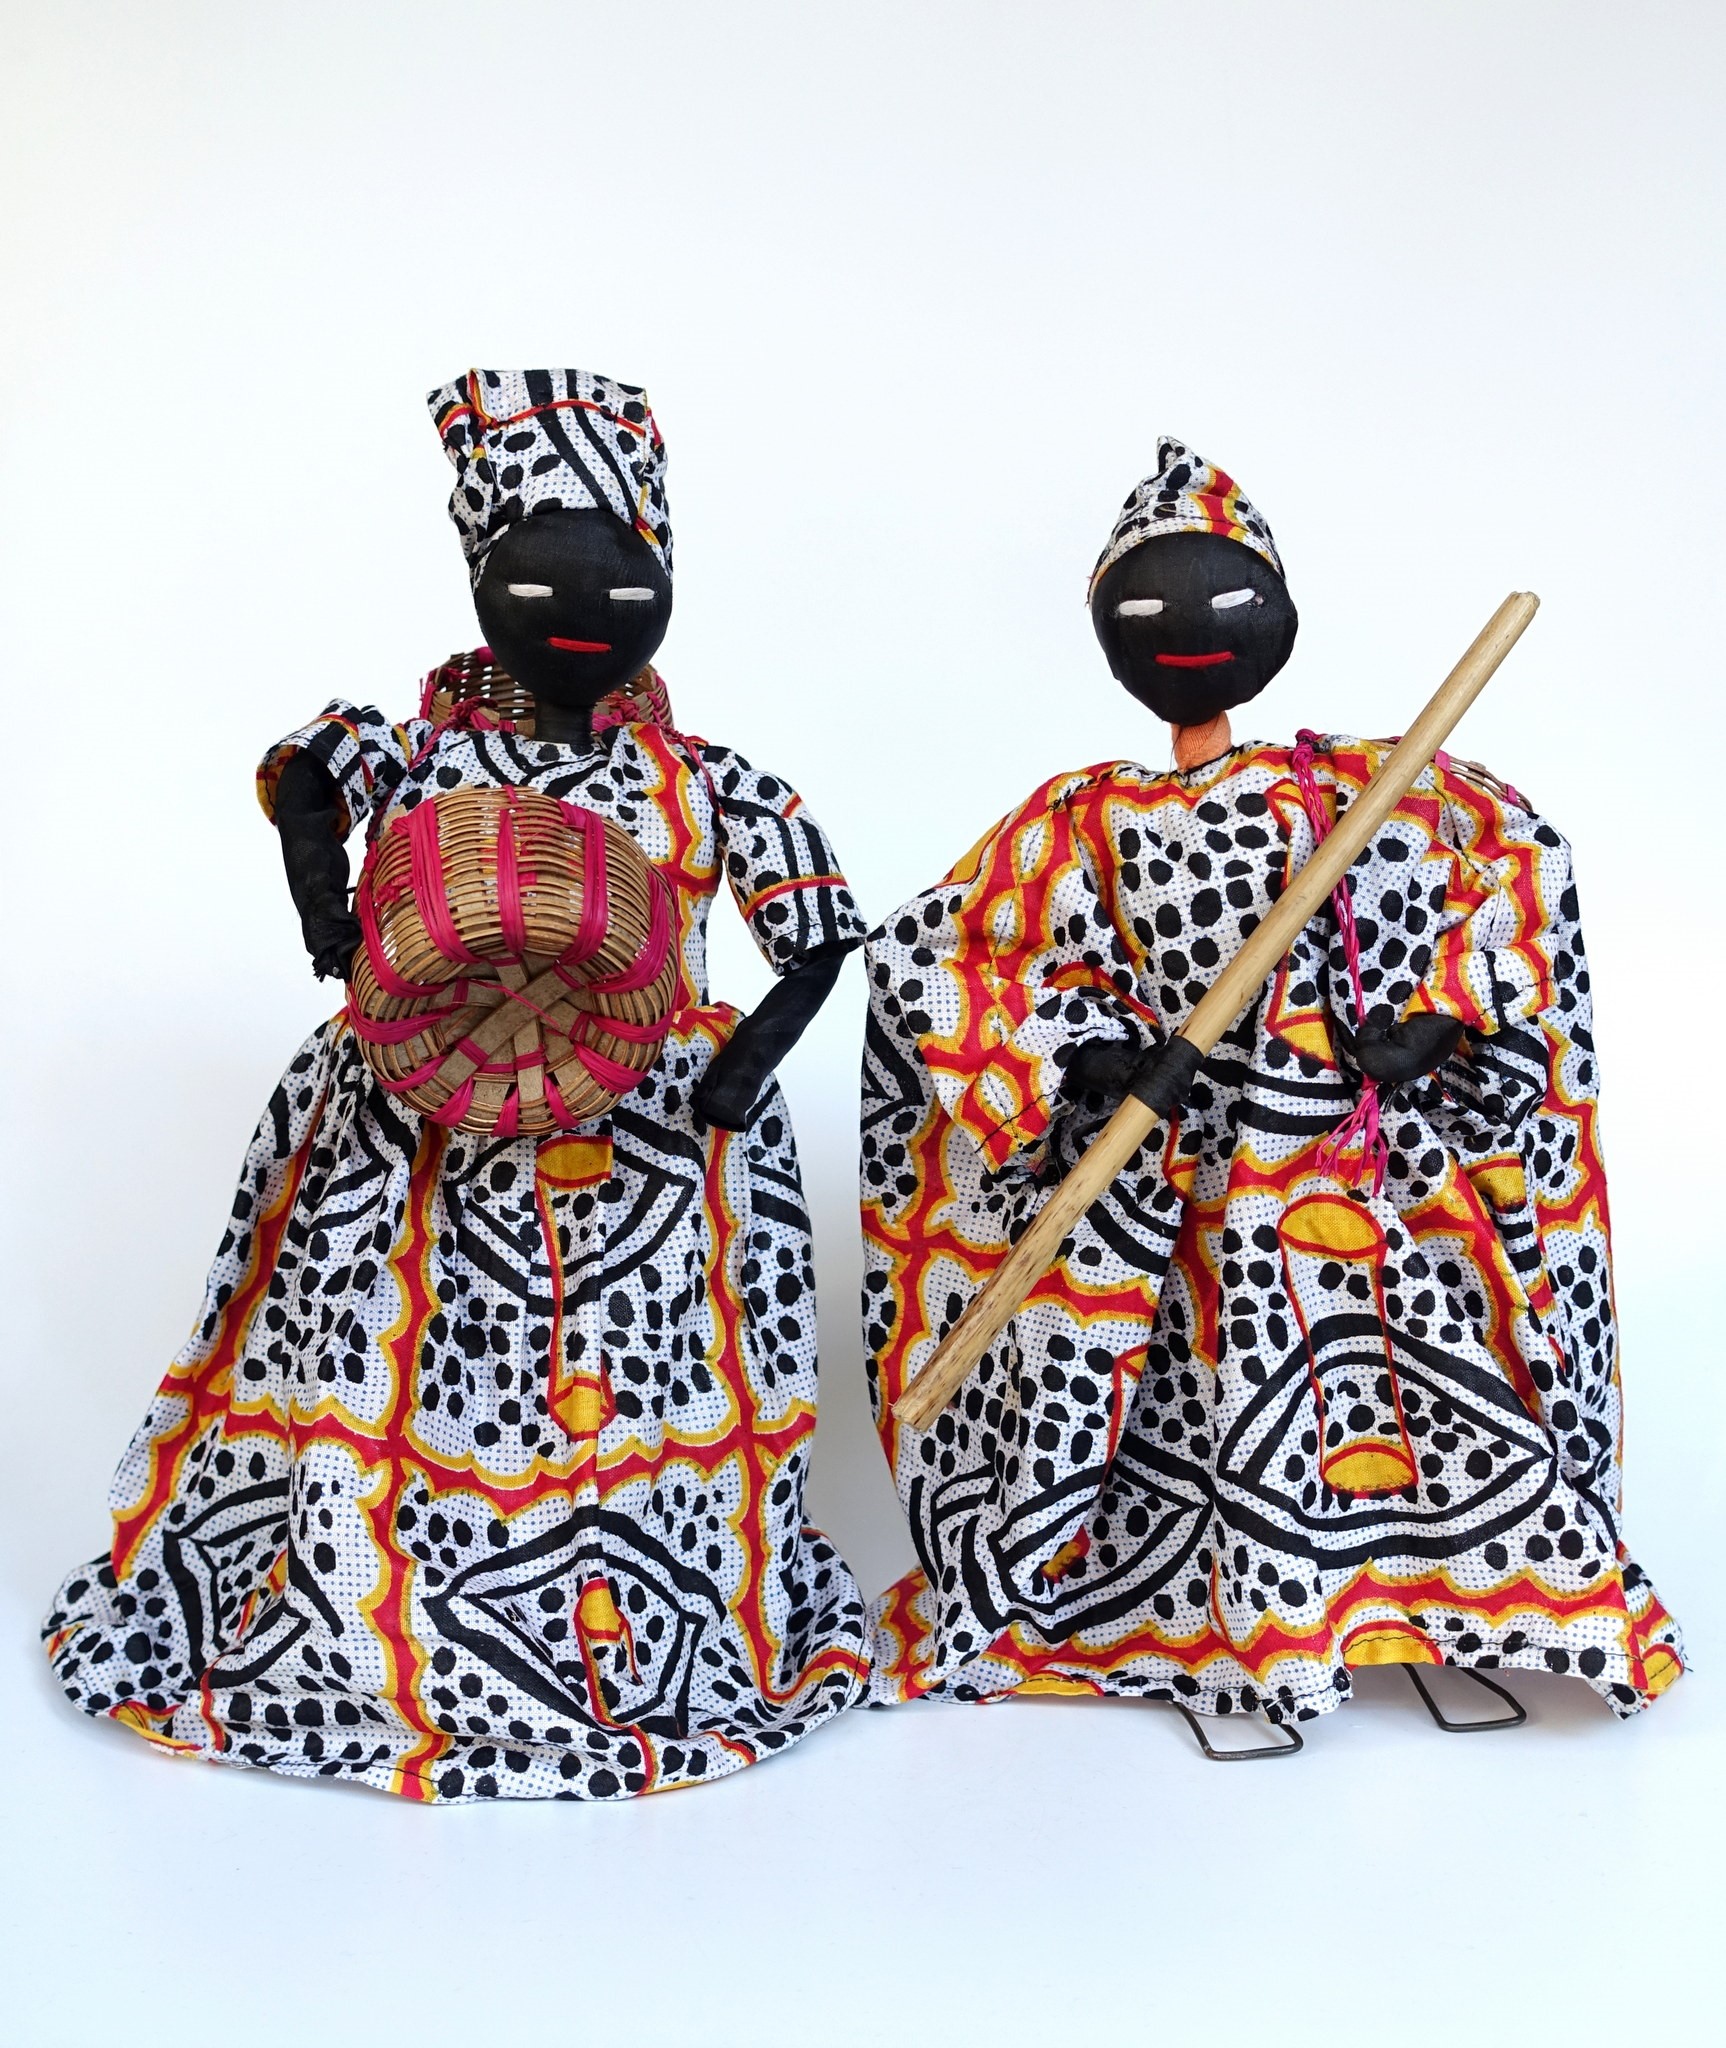 National costume dolls from all over the world